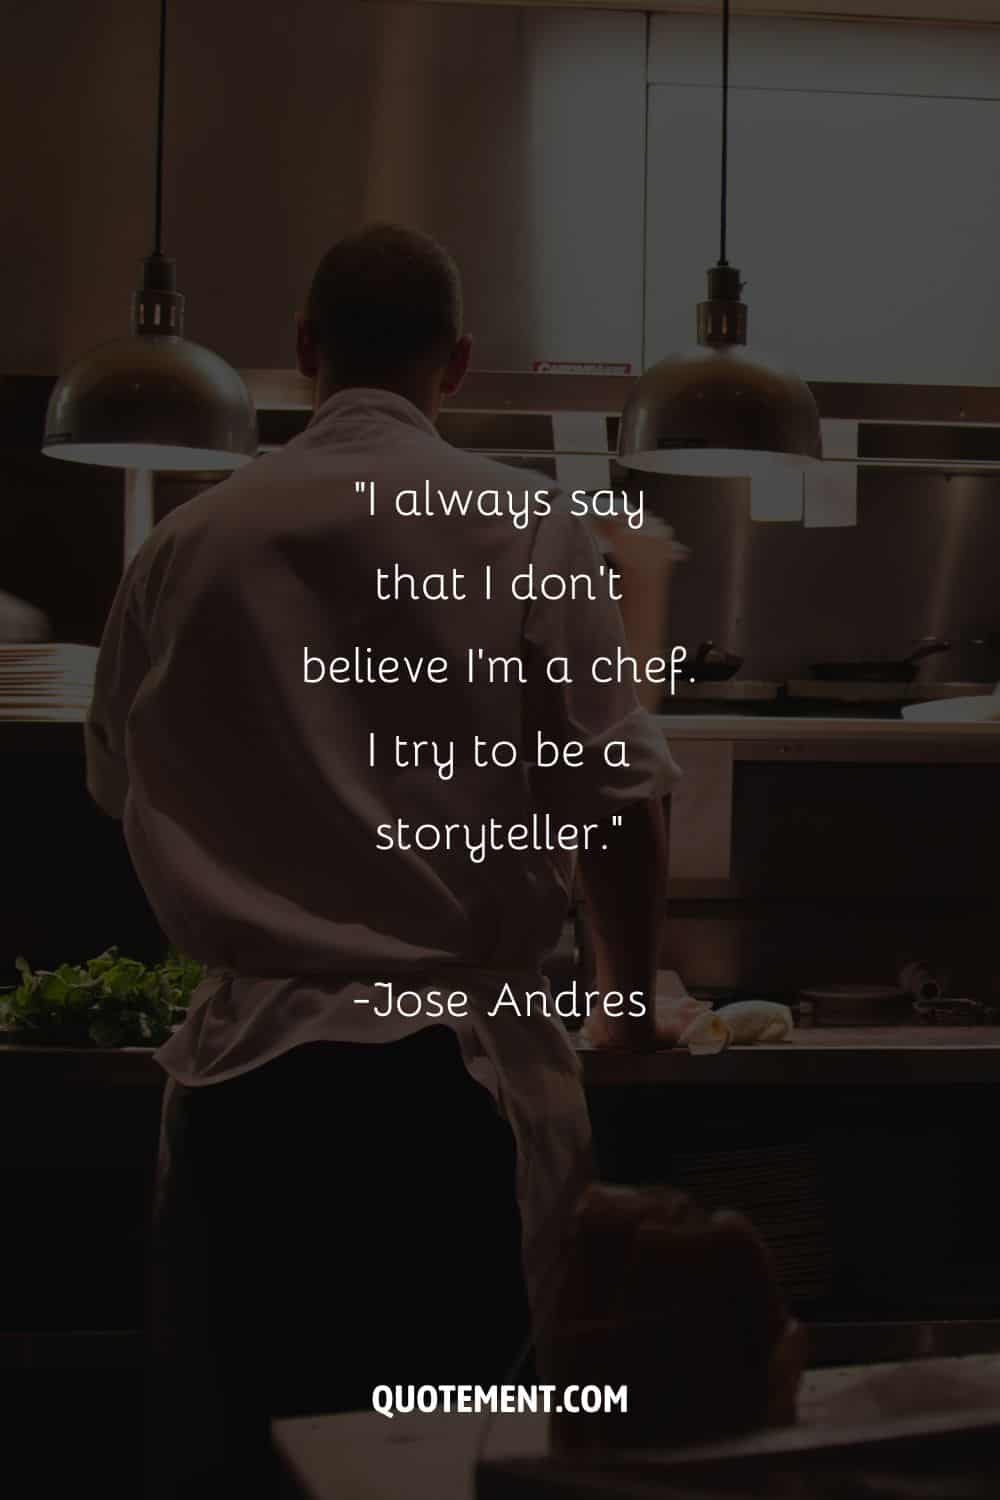 Image of a chef in the kitchen representing a quote on chefs.